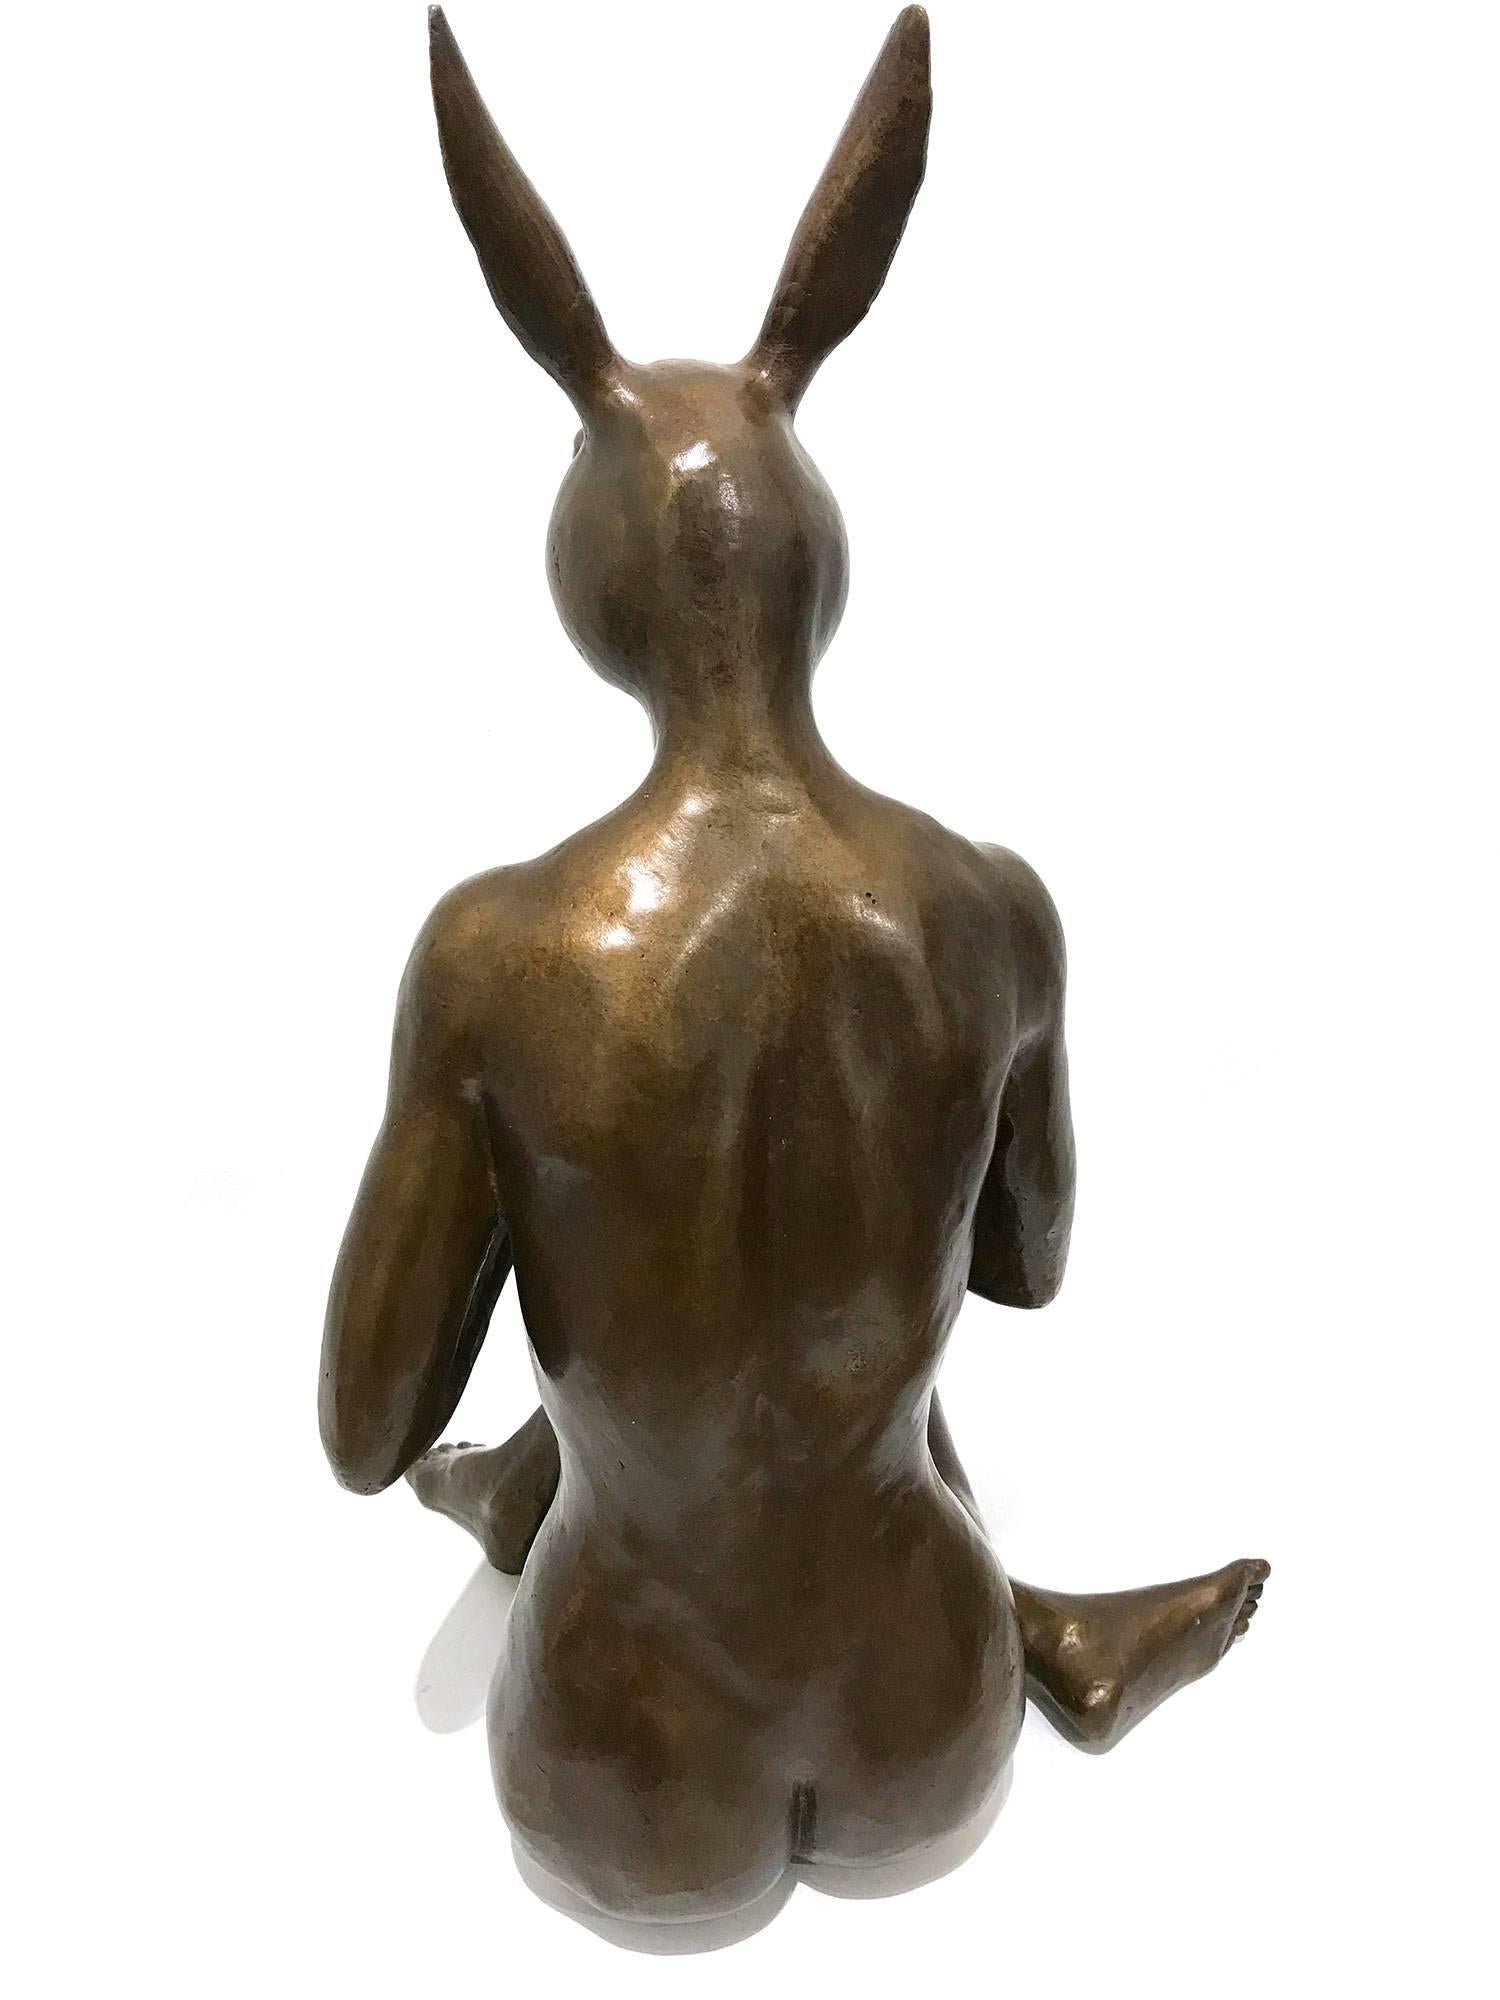 She Started Drinking Pinot Grigio as She Loved Real Housewives - Gold Figurative Sculpture by Gillie and Marc Schattner